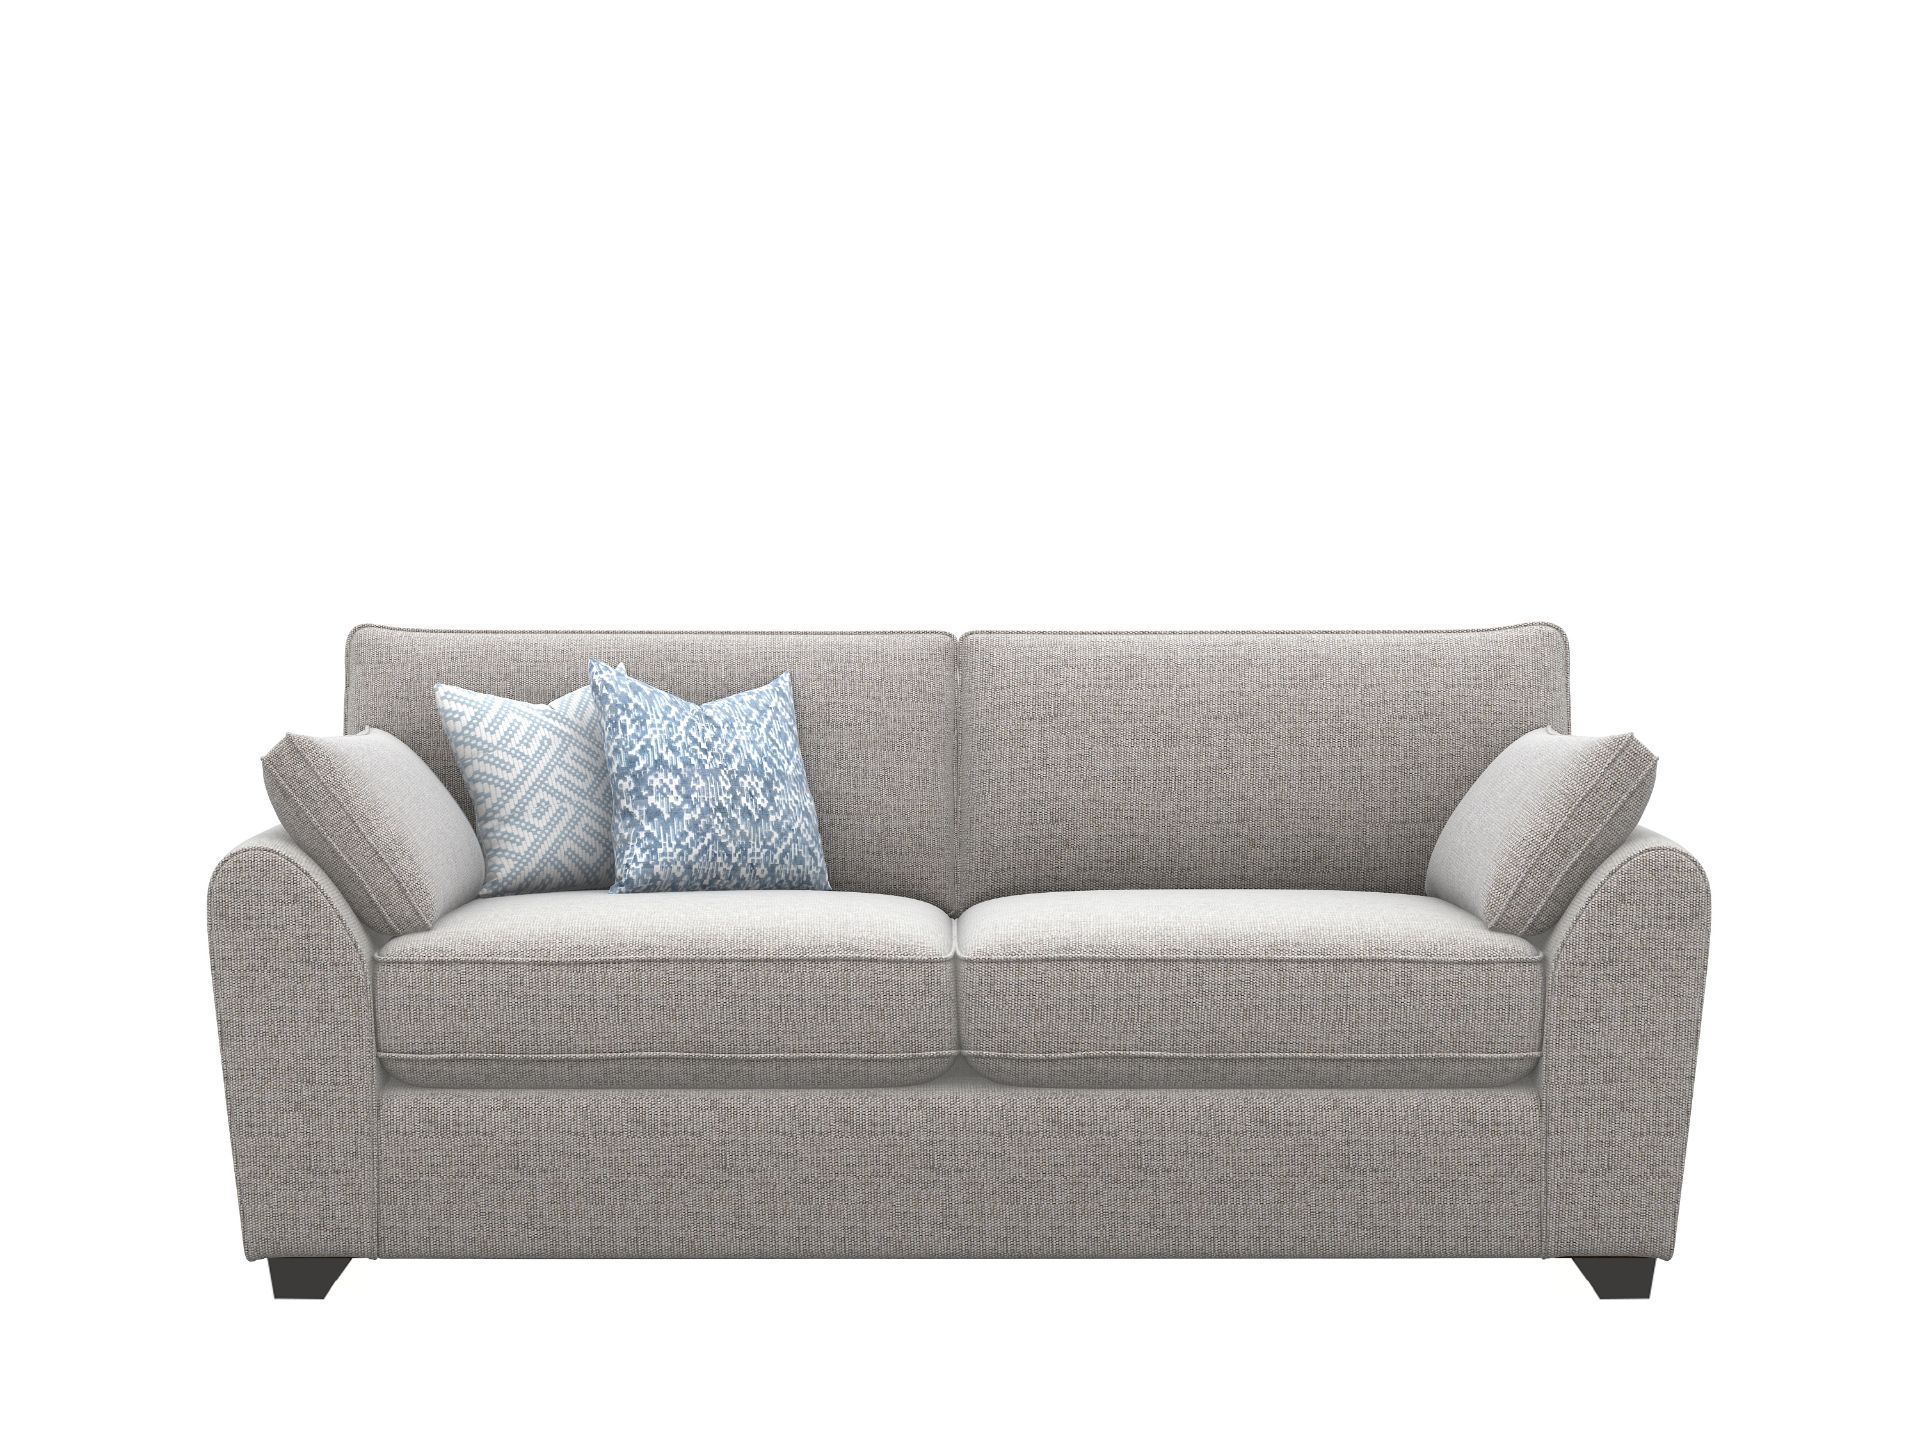 VAT 1x Cavendish Upholstery Idaho 3 Seater Sofa, Handmade in the UK - Keeper Silver - RRP œ1750 - - Image 2 of 2